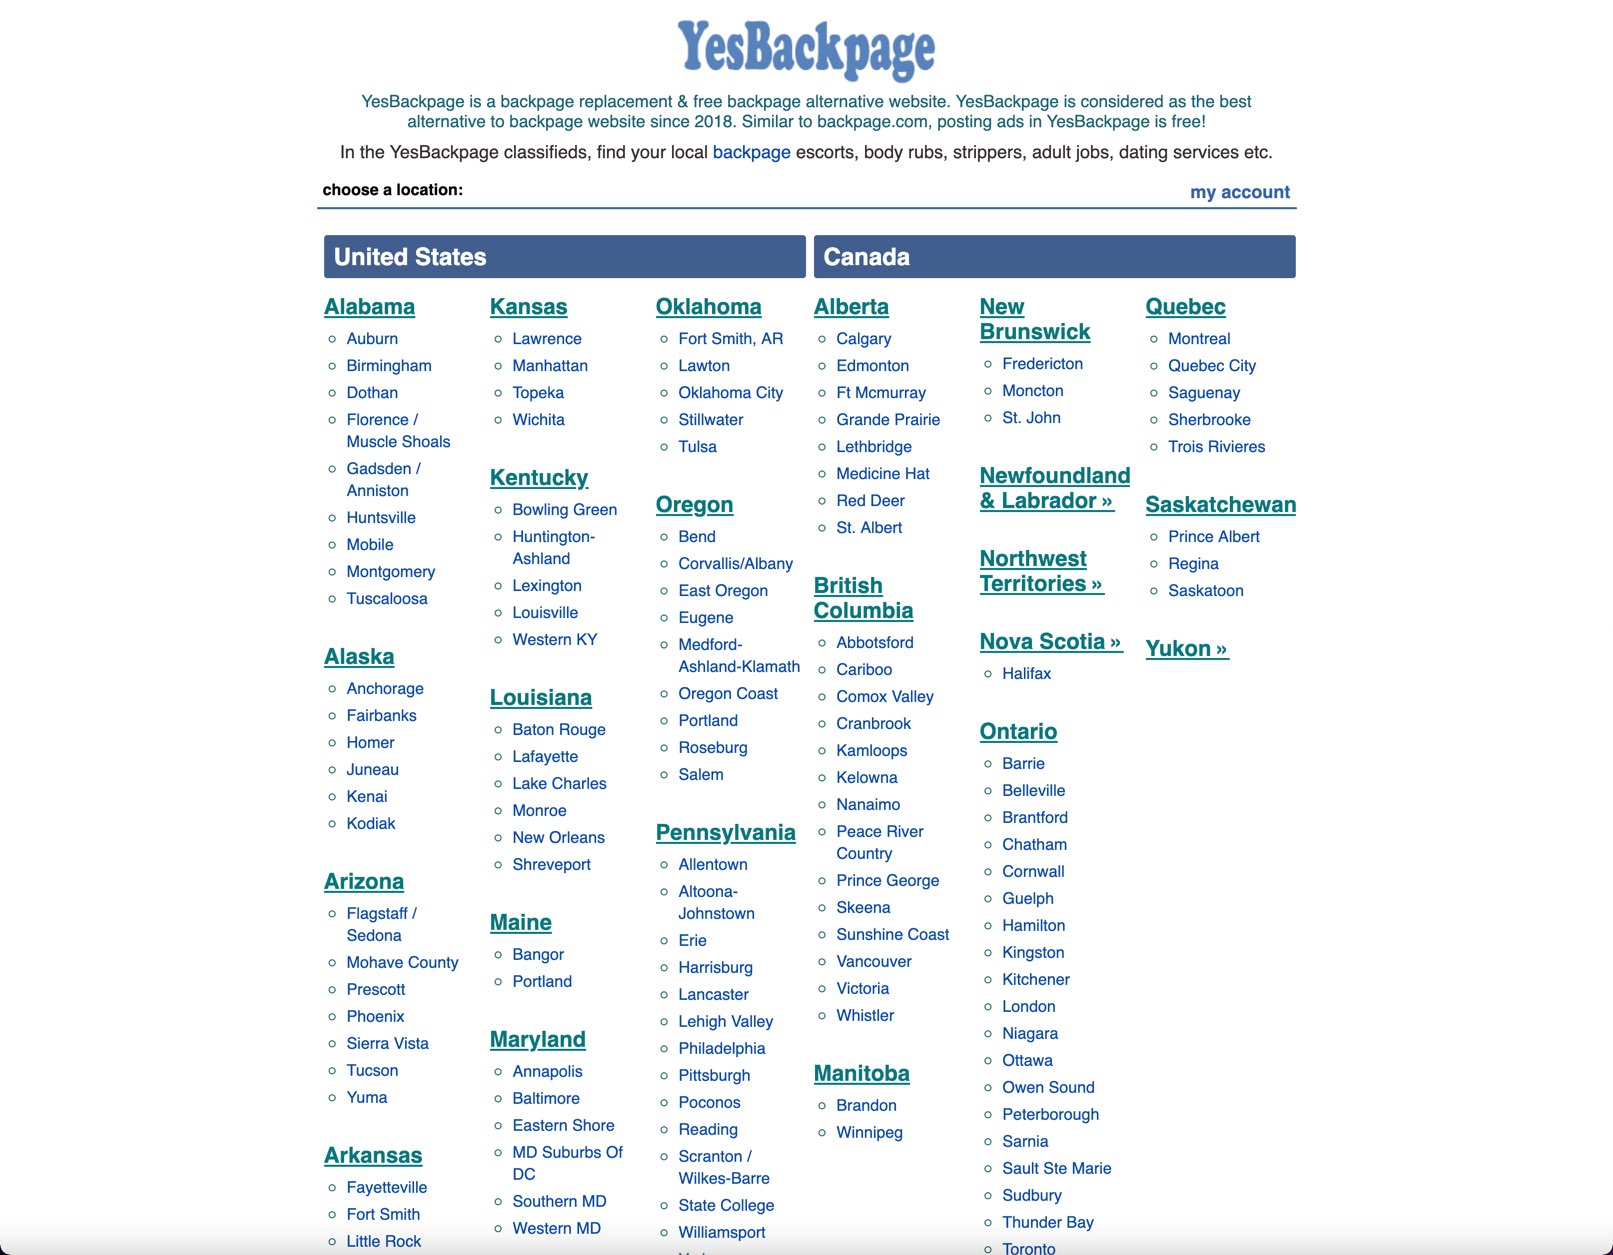 Backpage Sex Ads - YesBackPage & BackPage.com Alternative Escort Sites Like YesBackPage.com